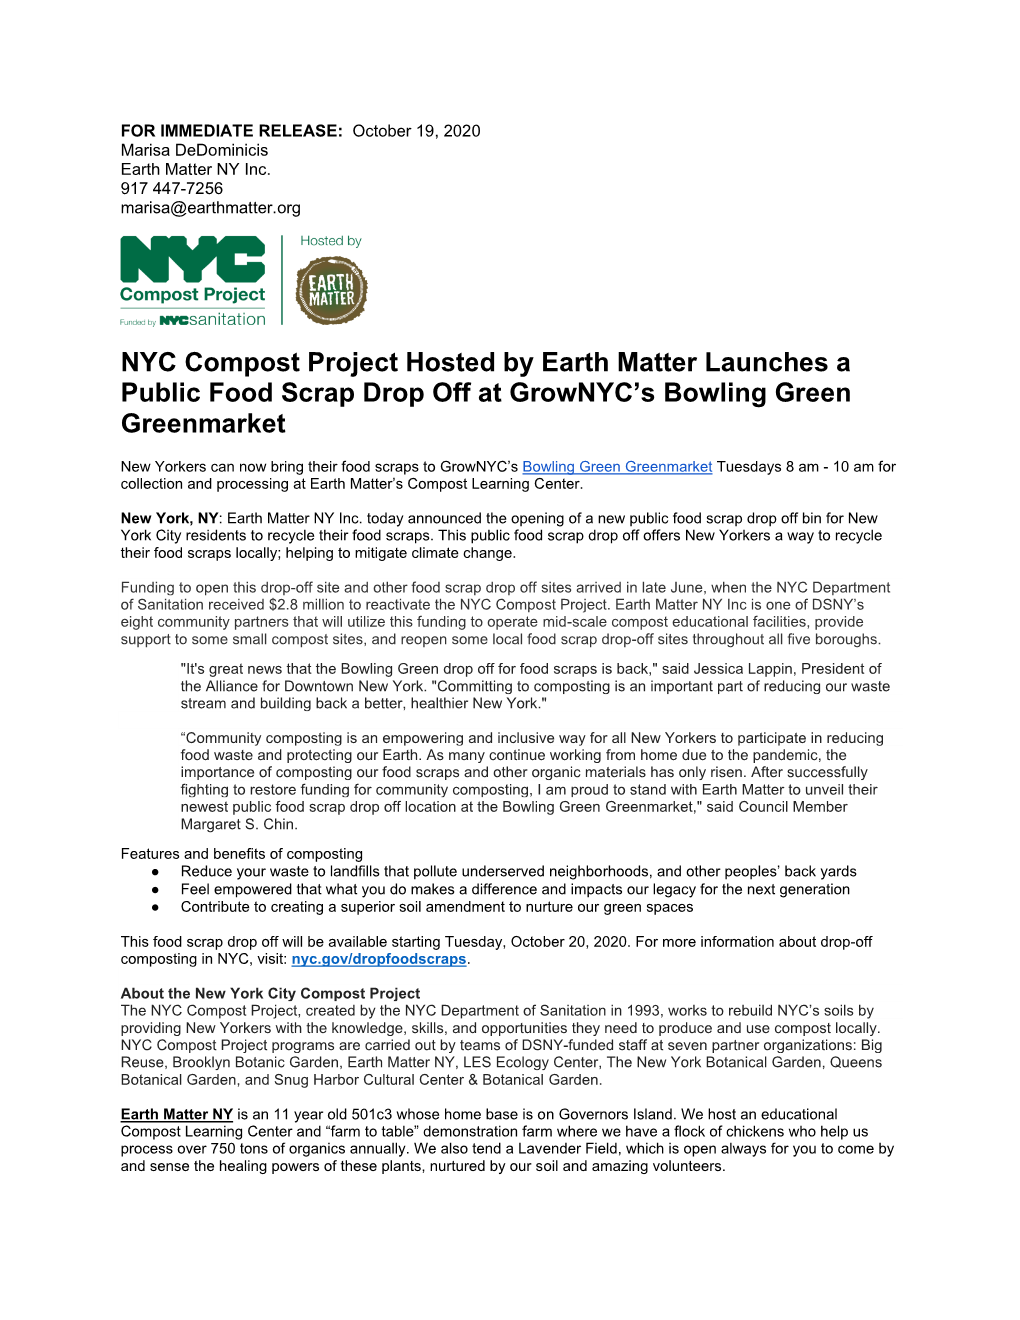 NYC Compost Project Hosted by Earth Matter Launches a Public Food Scrap Drop Off at Grownyc’S Bowling Green Greenmarket